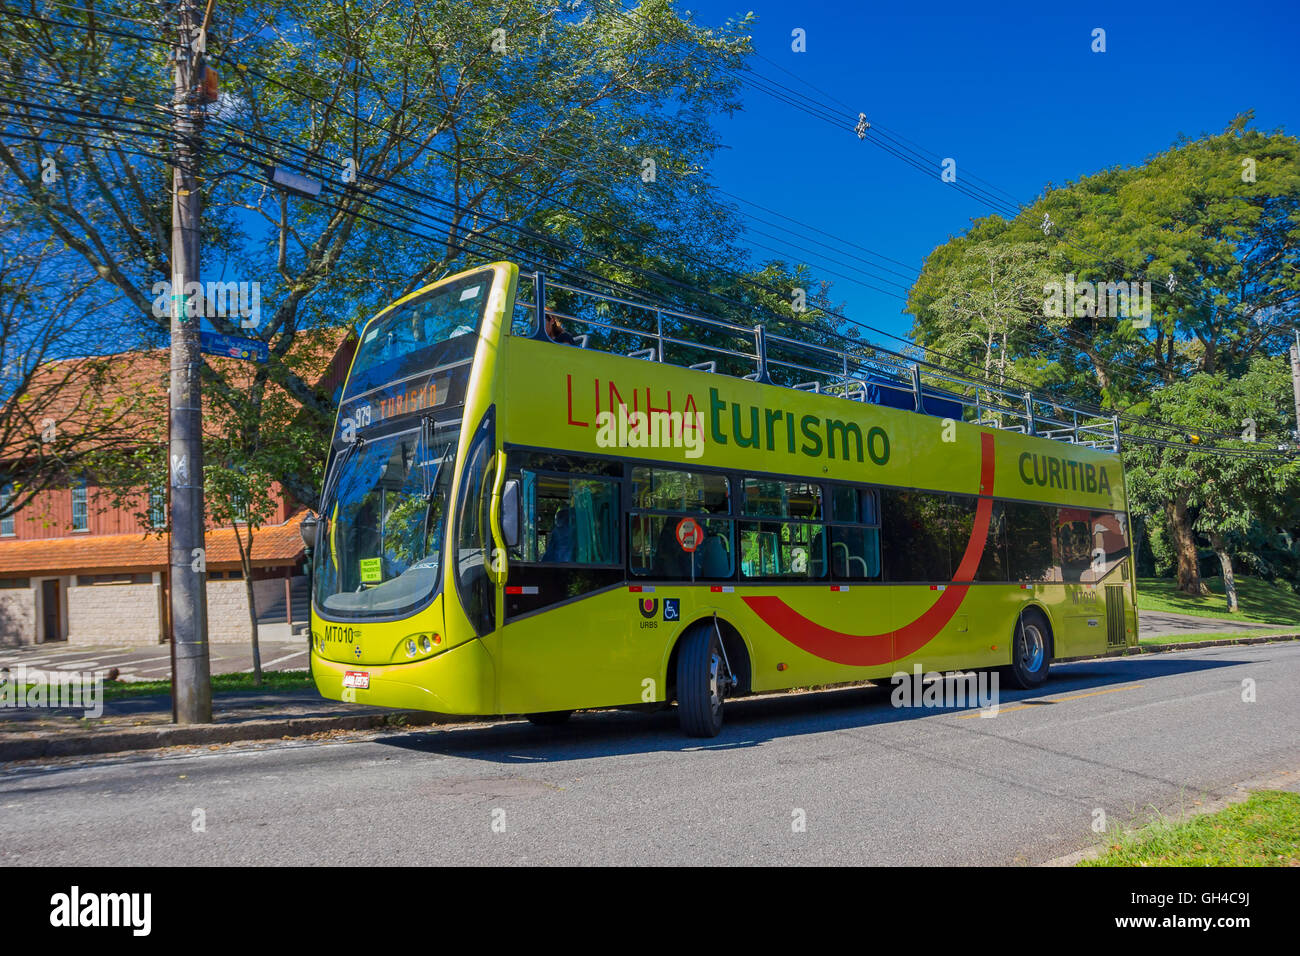 CURITIBA ,BRAZIL - MAY 12, 2016: green bus tour waiting on the stop parked in the street next to some trees Stock Photo